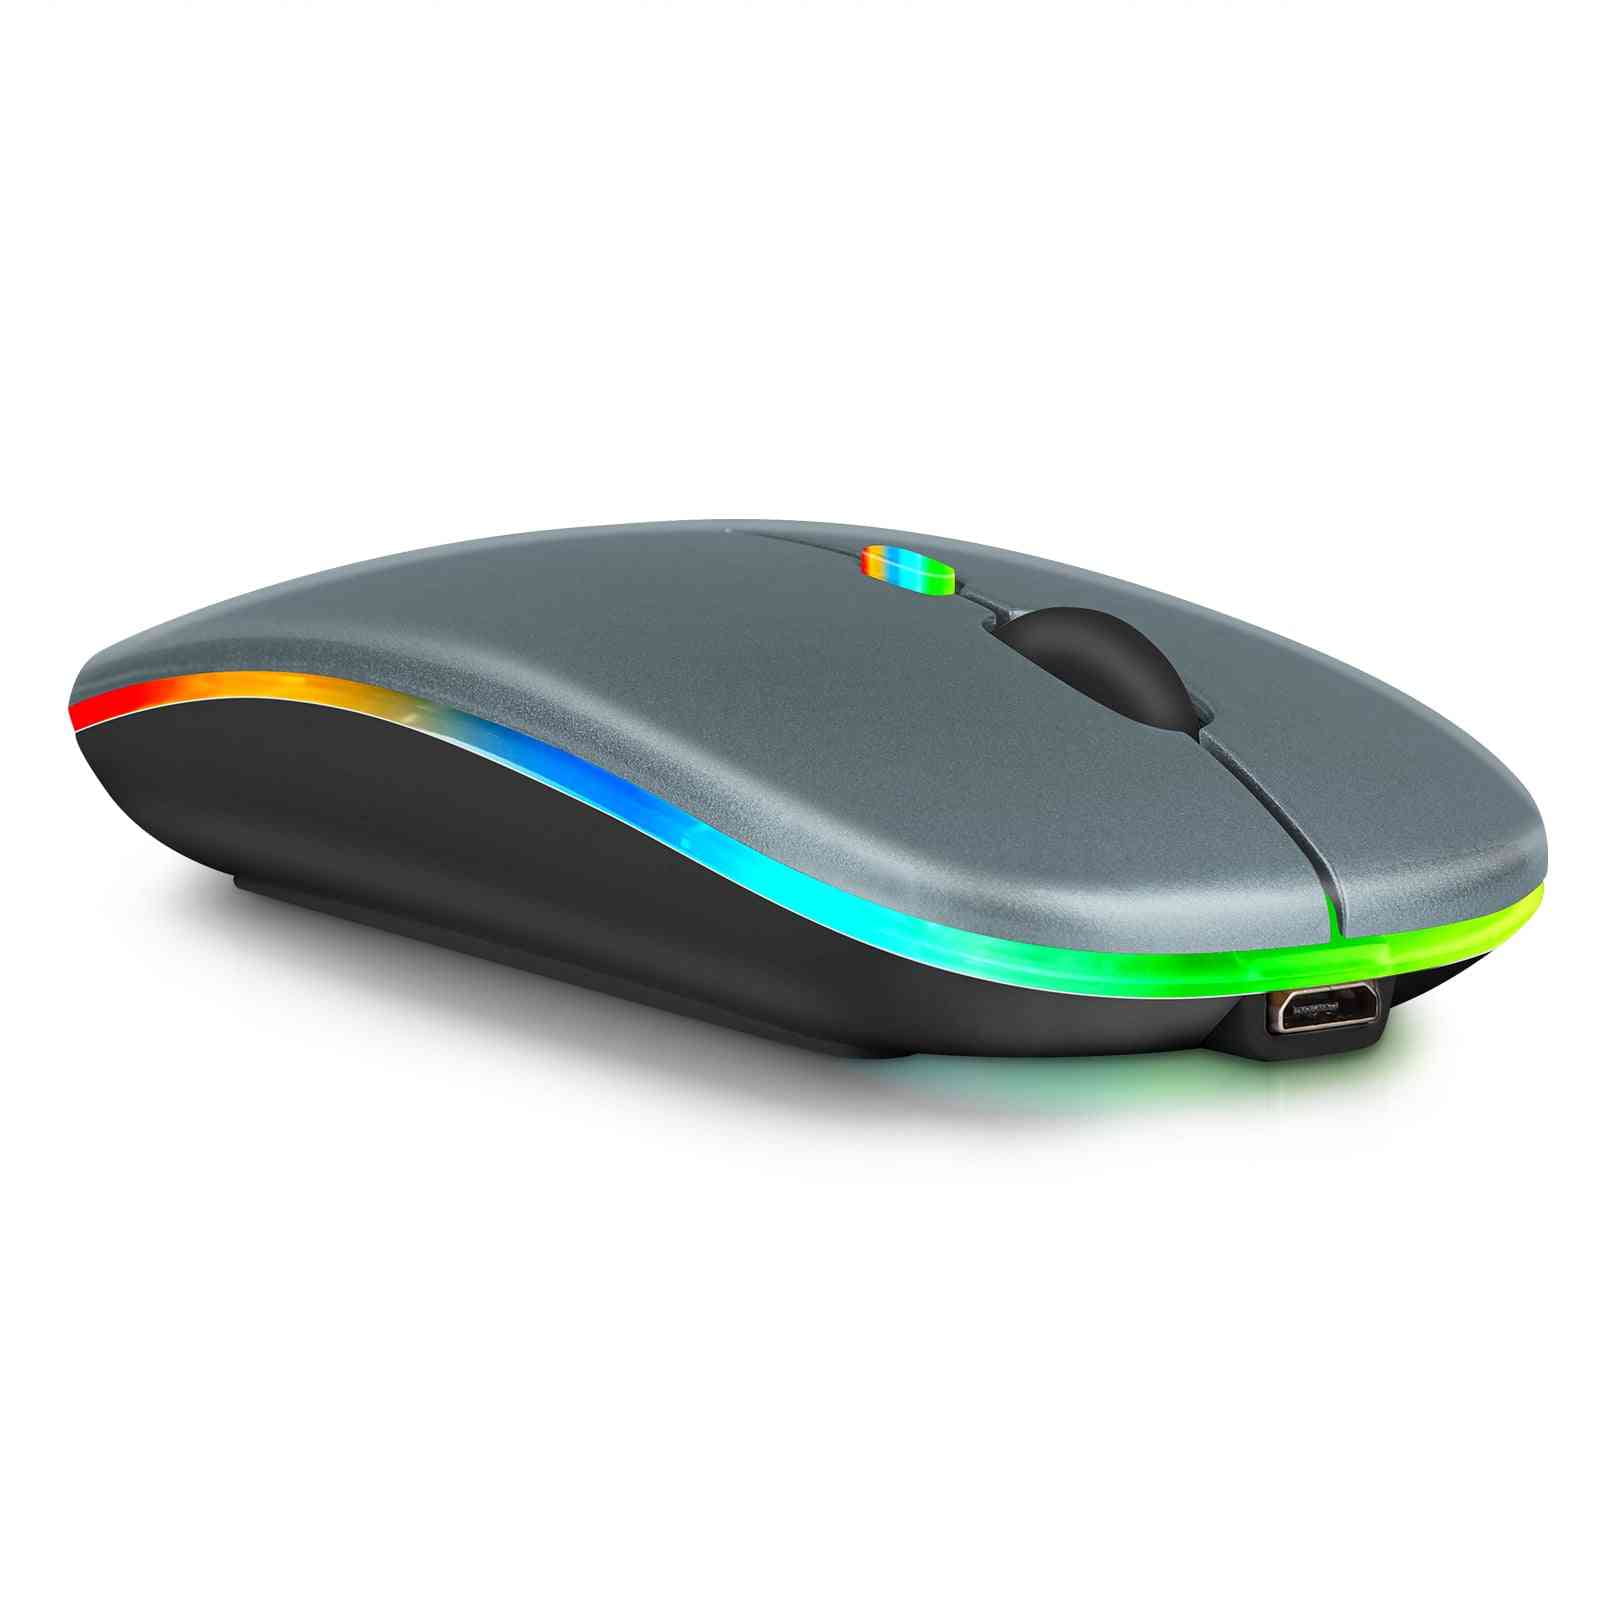 Bluetooth Mouse, Wireless Mouse for Tablet/Laptop/Mac/iPhone/iPad/Notebook,  Mini Portable Rechargeable USB Mini Slim Optical Mouse Silent for  Windows/Linux/Android/Macbook silver color